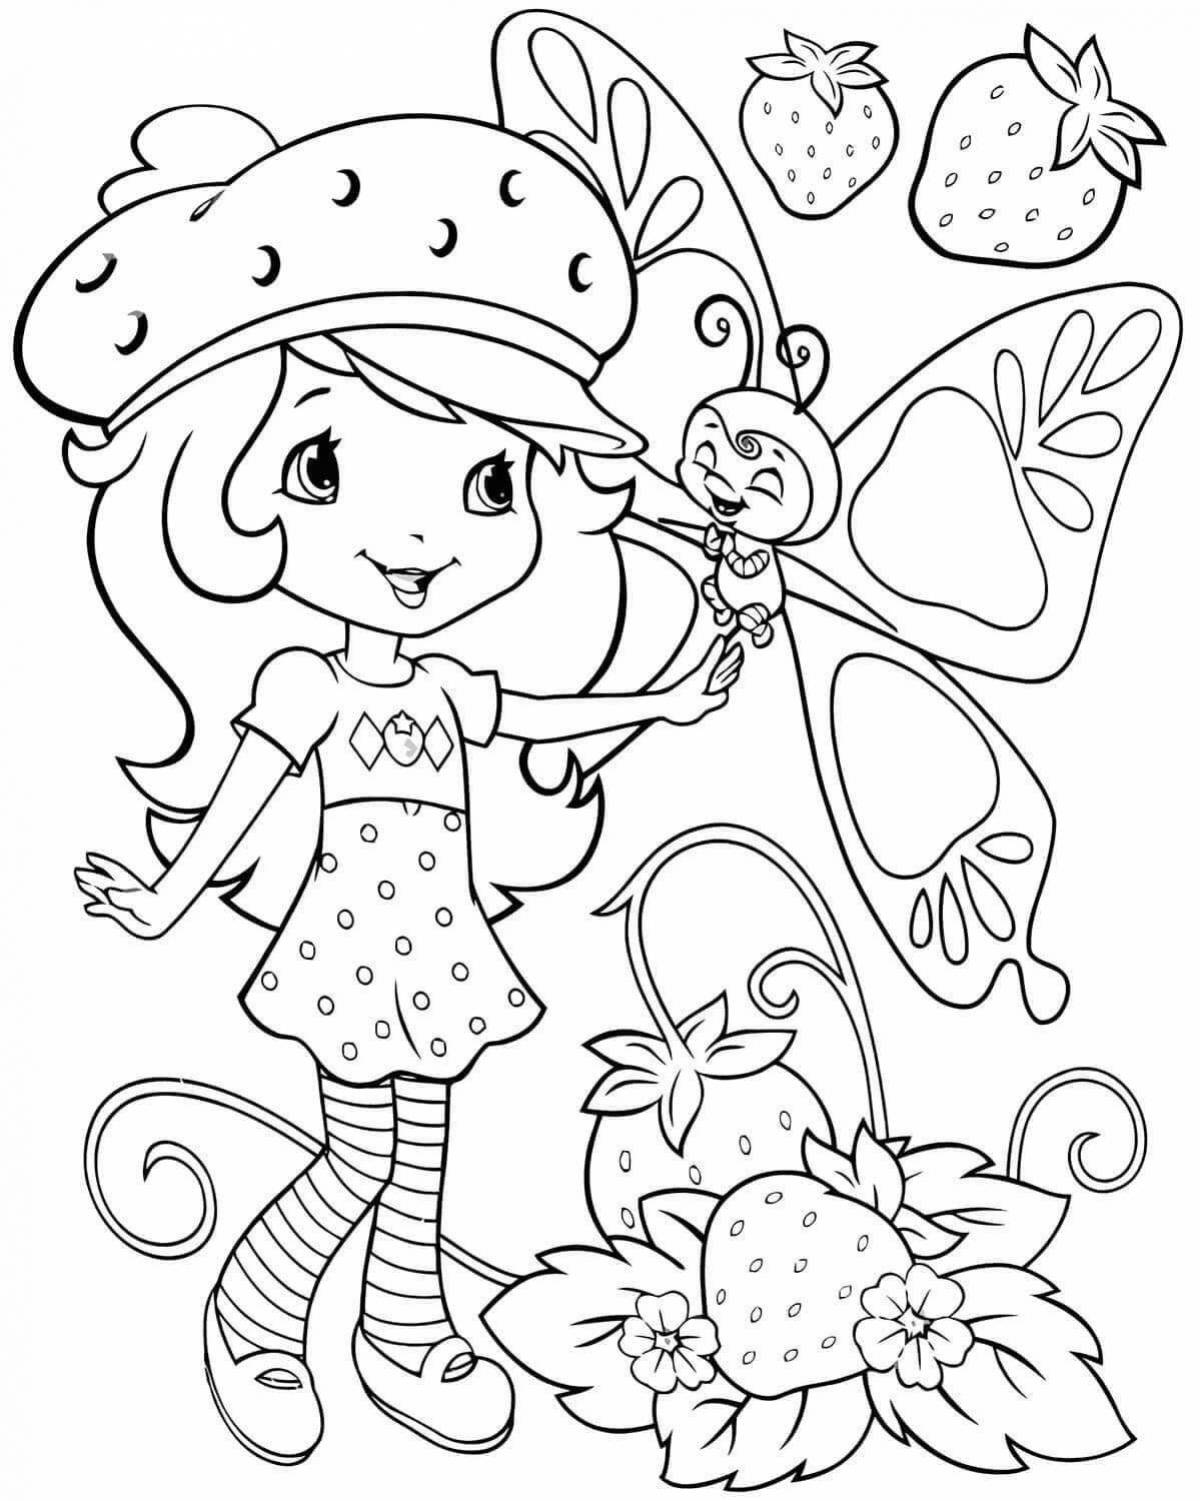 Glorious coloring book for girls 5-7 years old